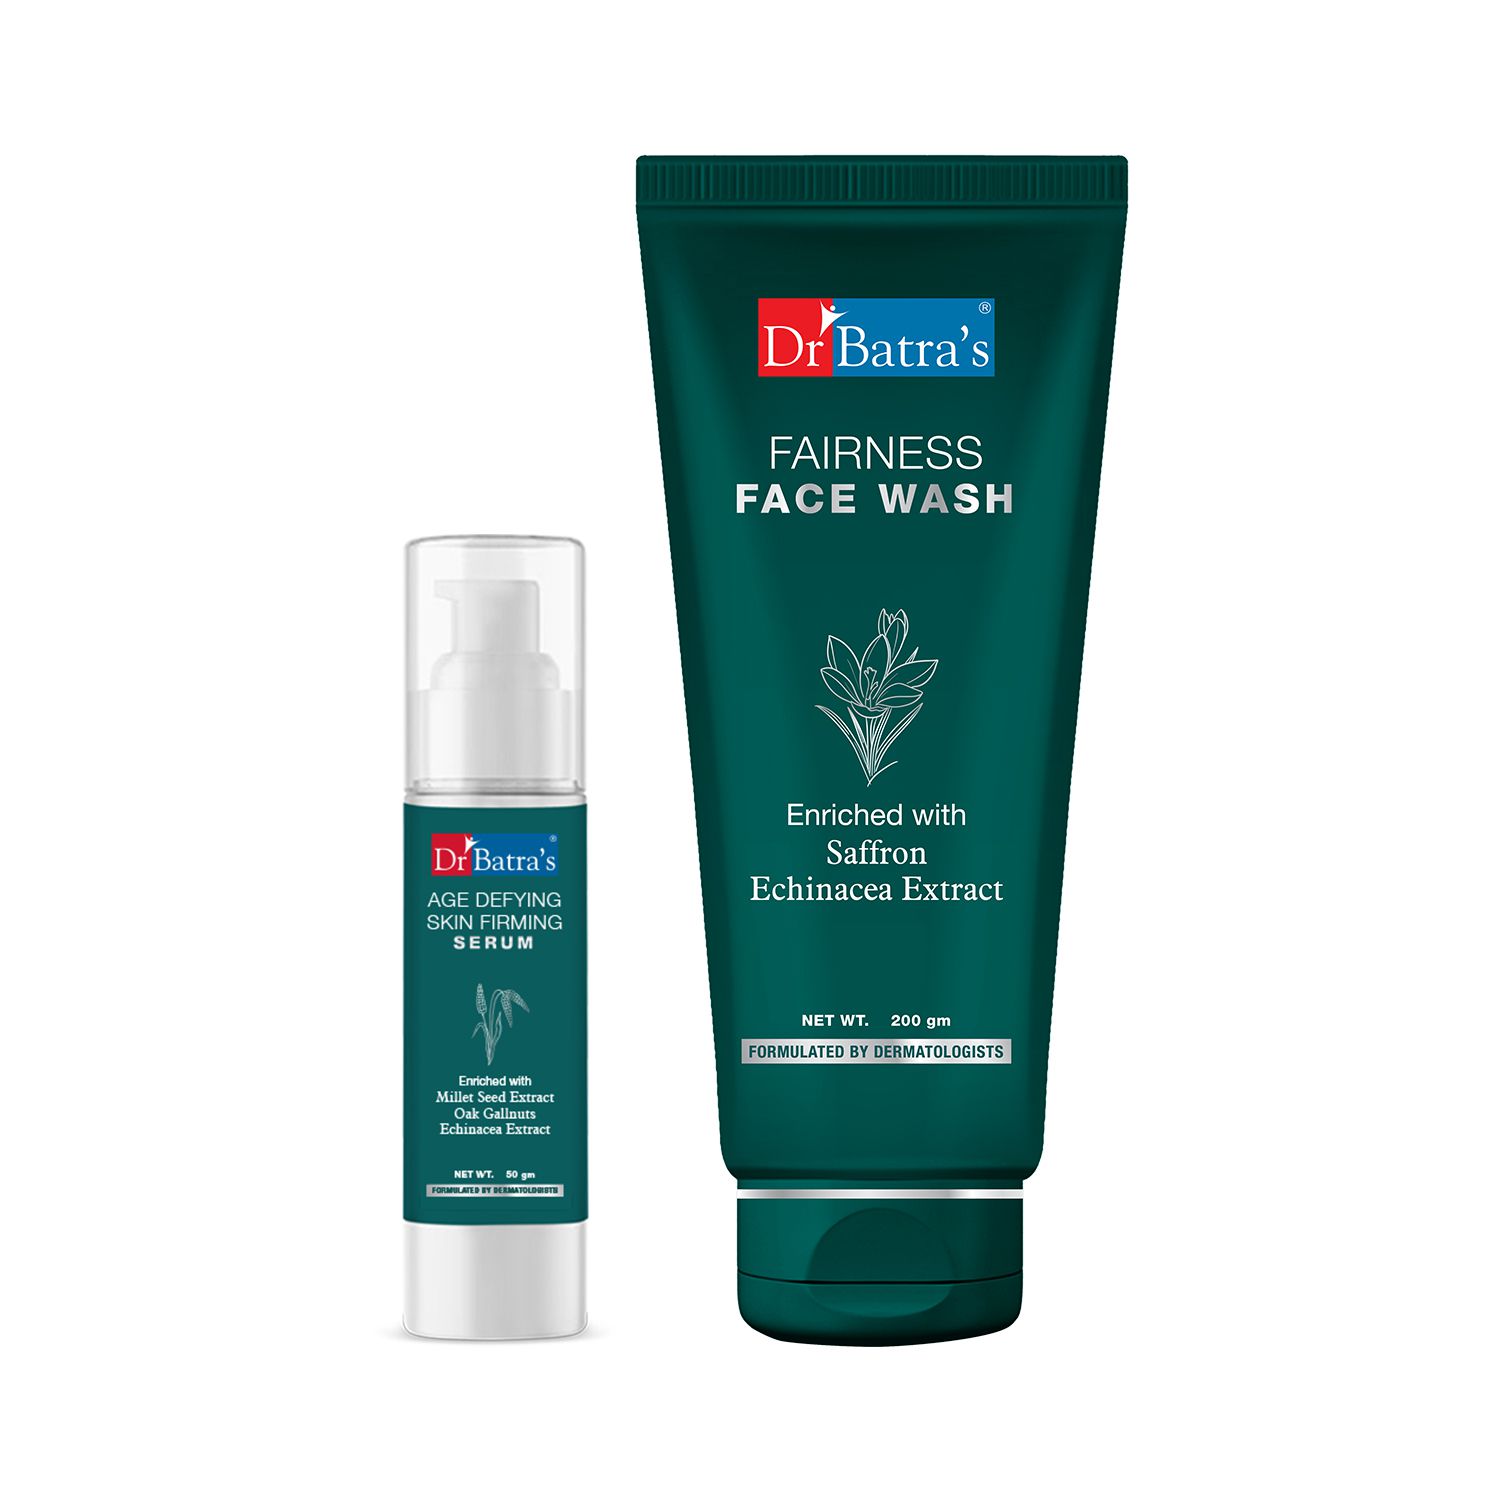     			Dr Batra's Age Defying Skin Firming Serum - 50 G and Fairness Face Wash 200 gm (Pack of 2)